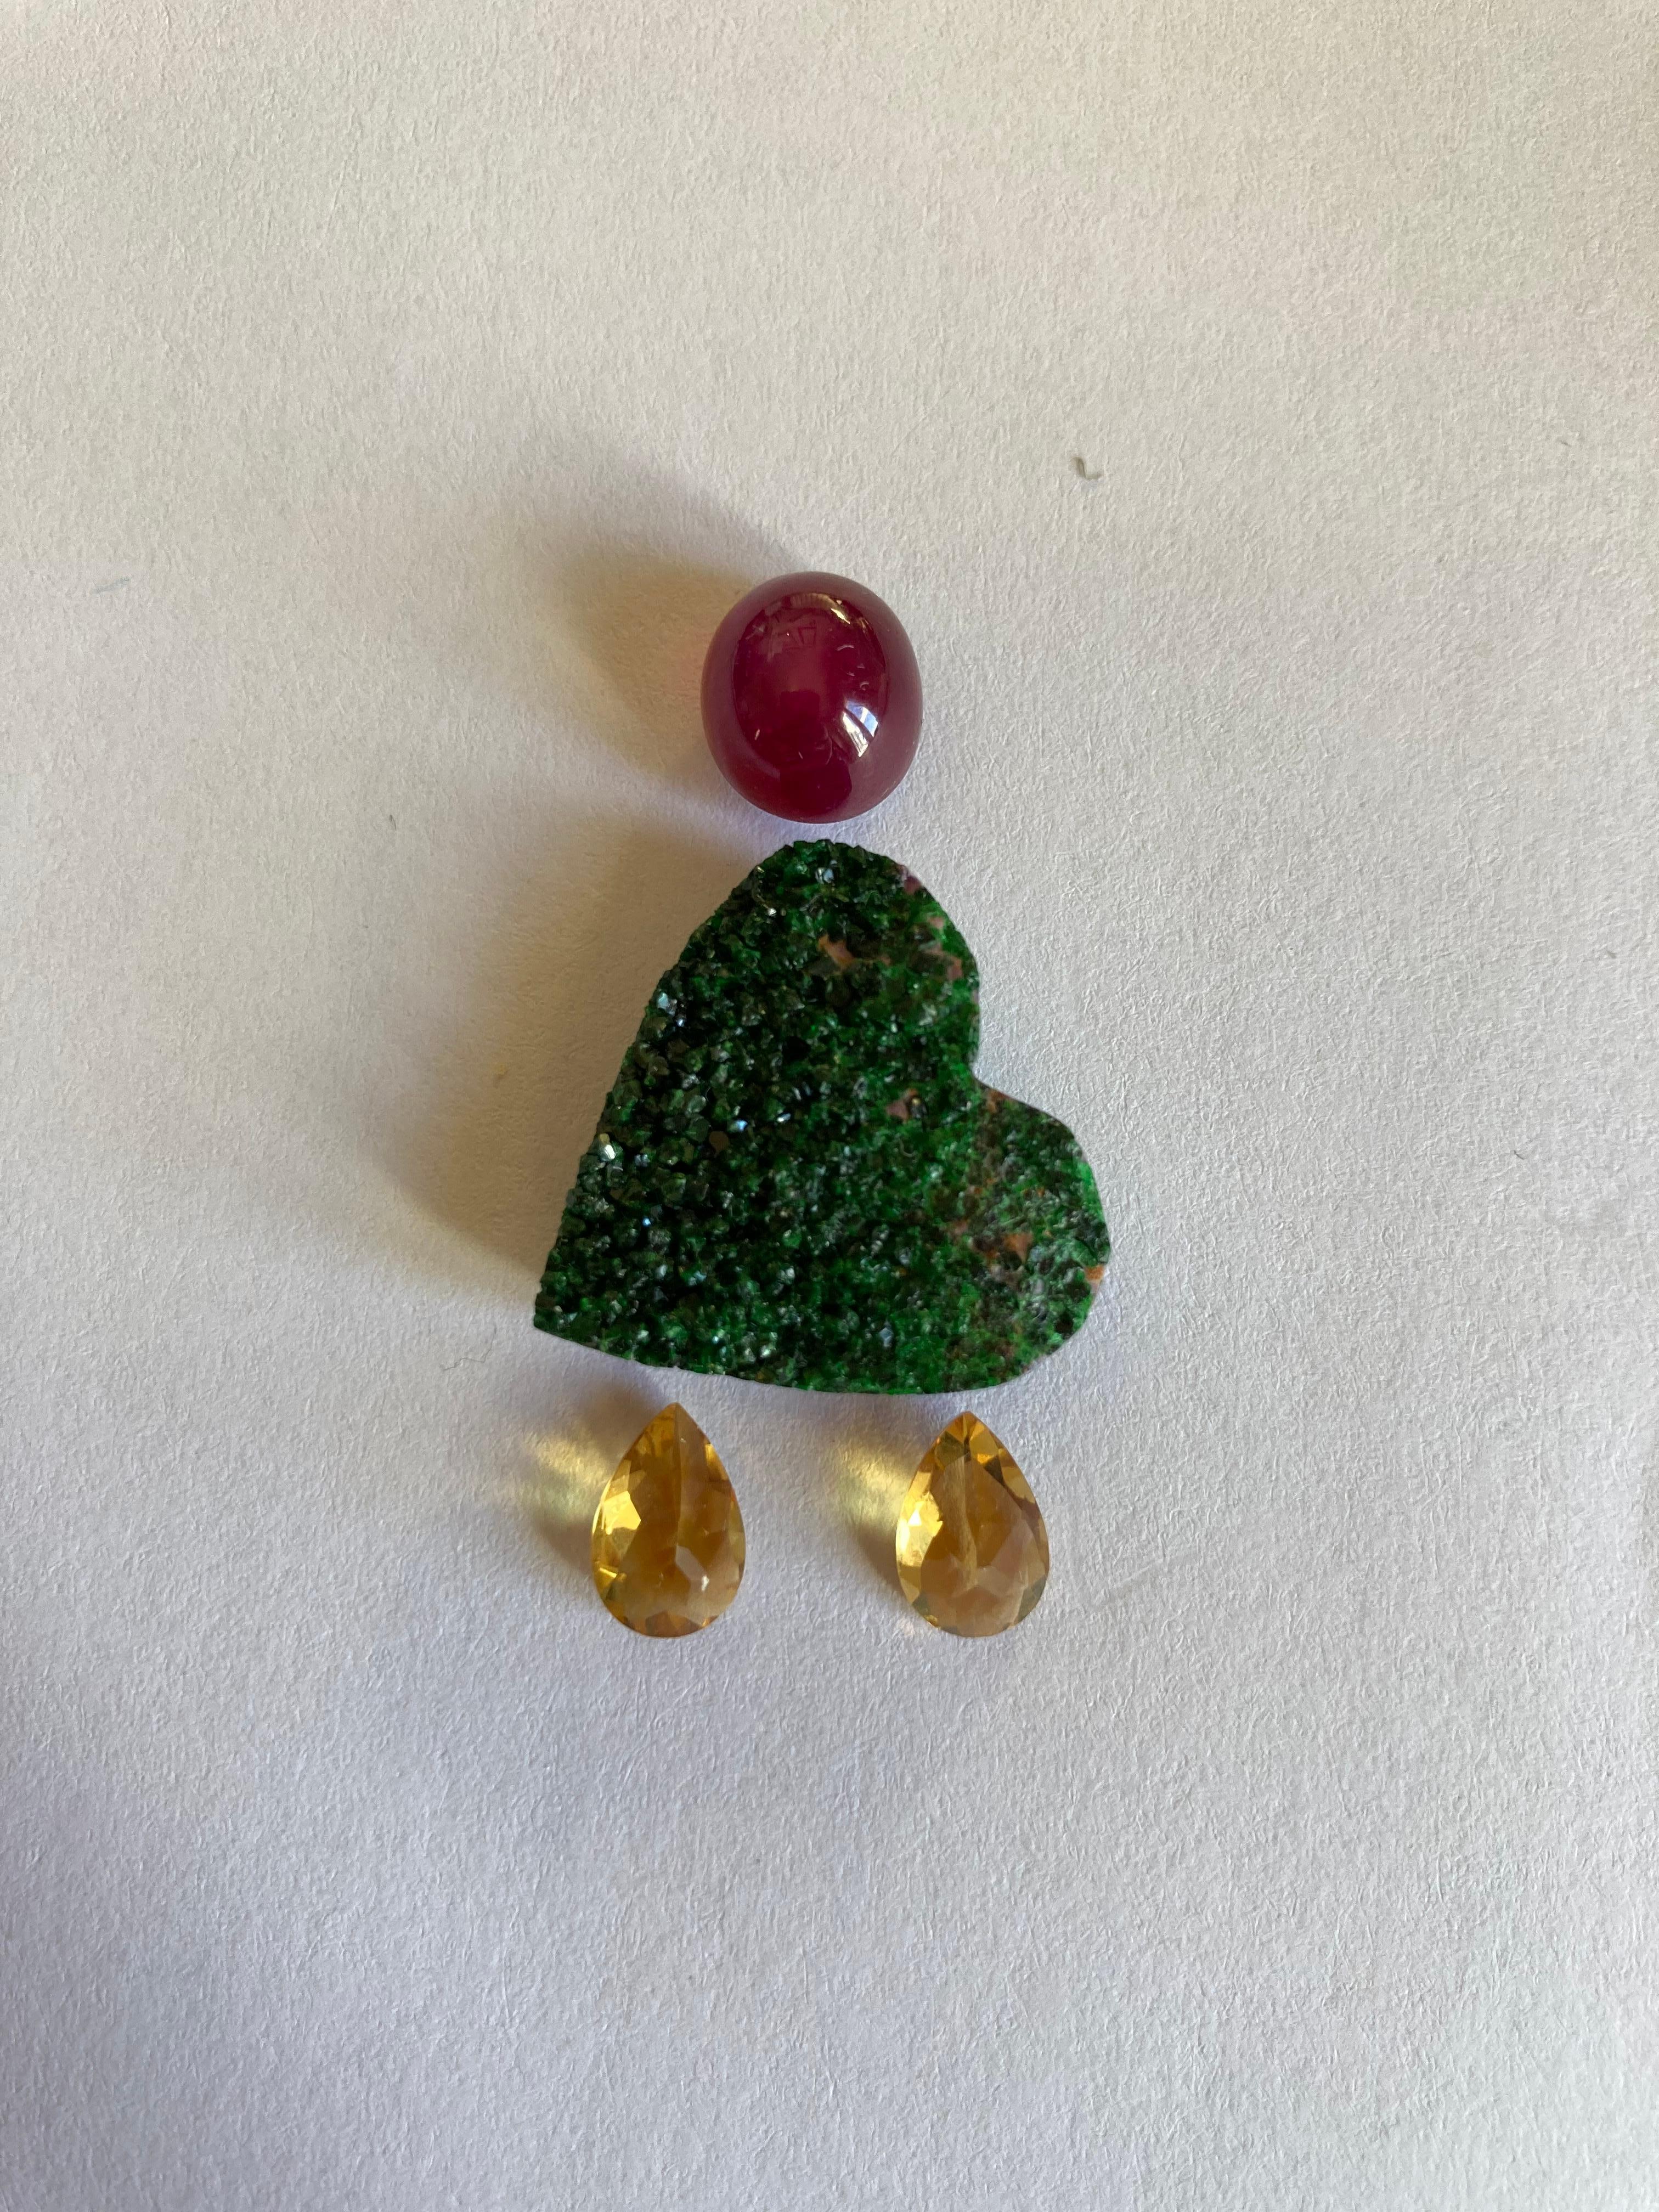 Green Granat Heart Necklace with Star Ruby Cabochon and Citrine Original Design For Sale 4